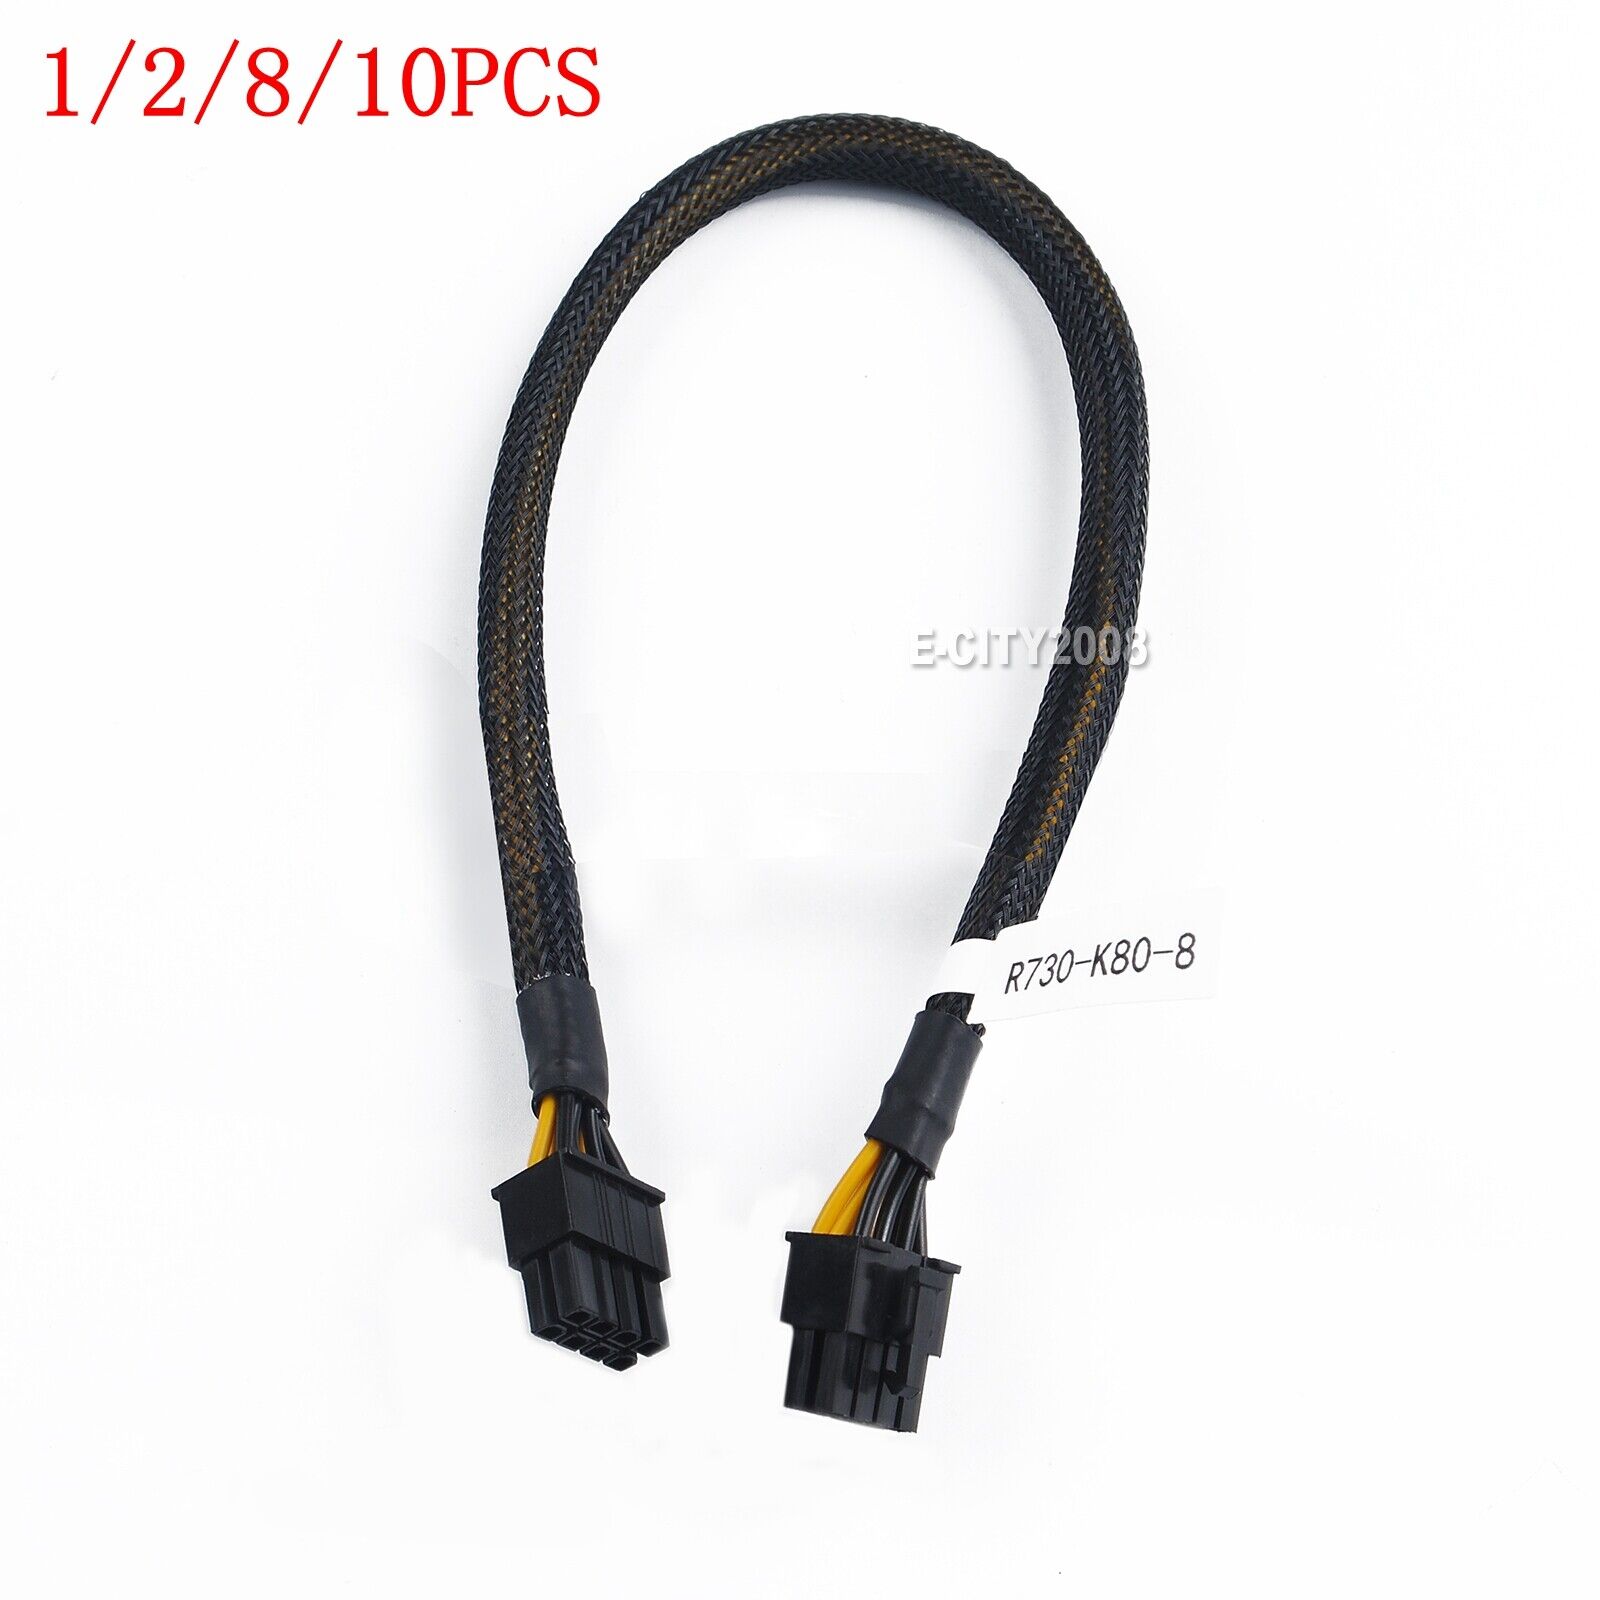 PCIE GPU 8Pin to 8Pin Power Cable For DELL R730 to Nvidia K80/M40/M60/P40/P100